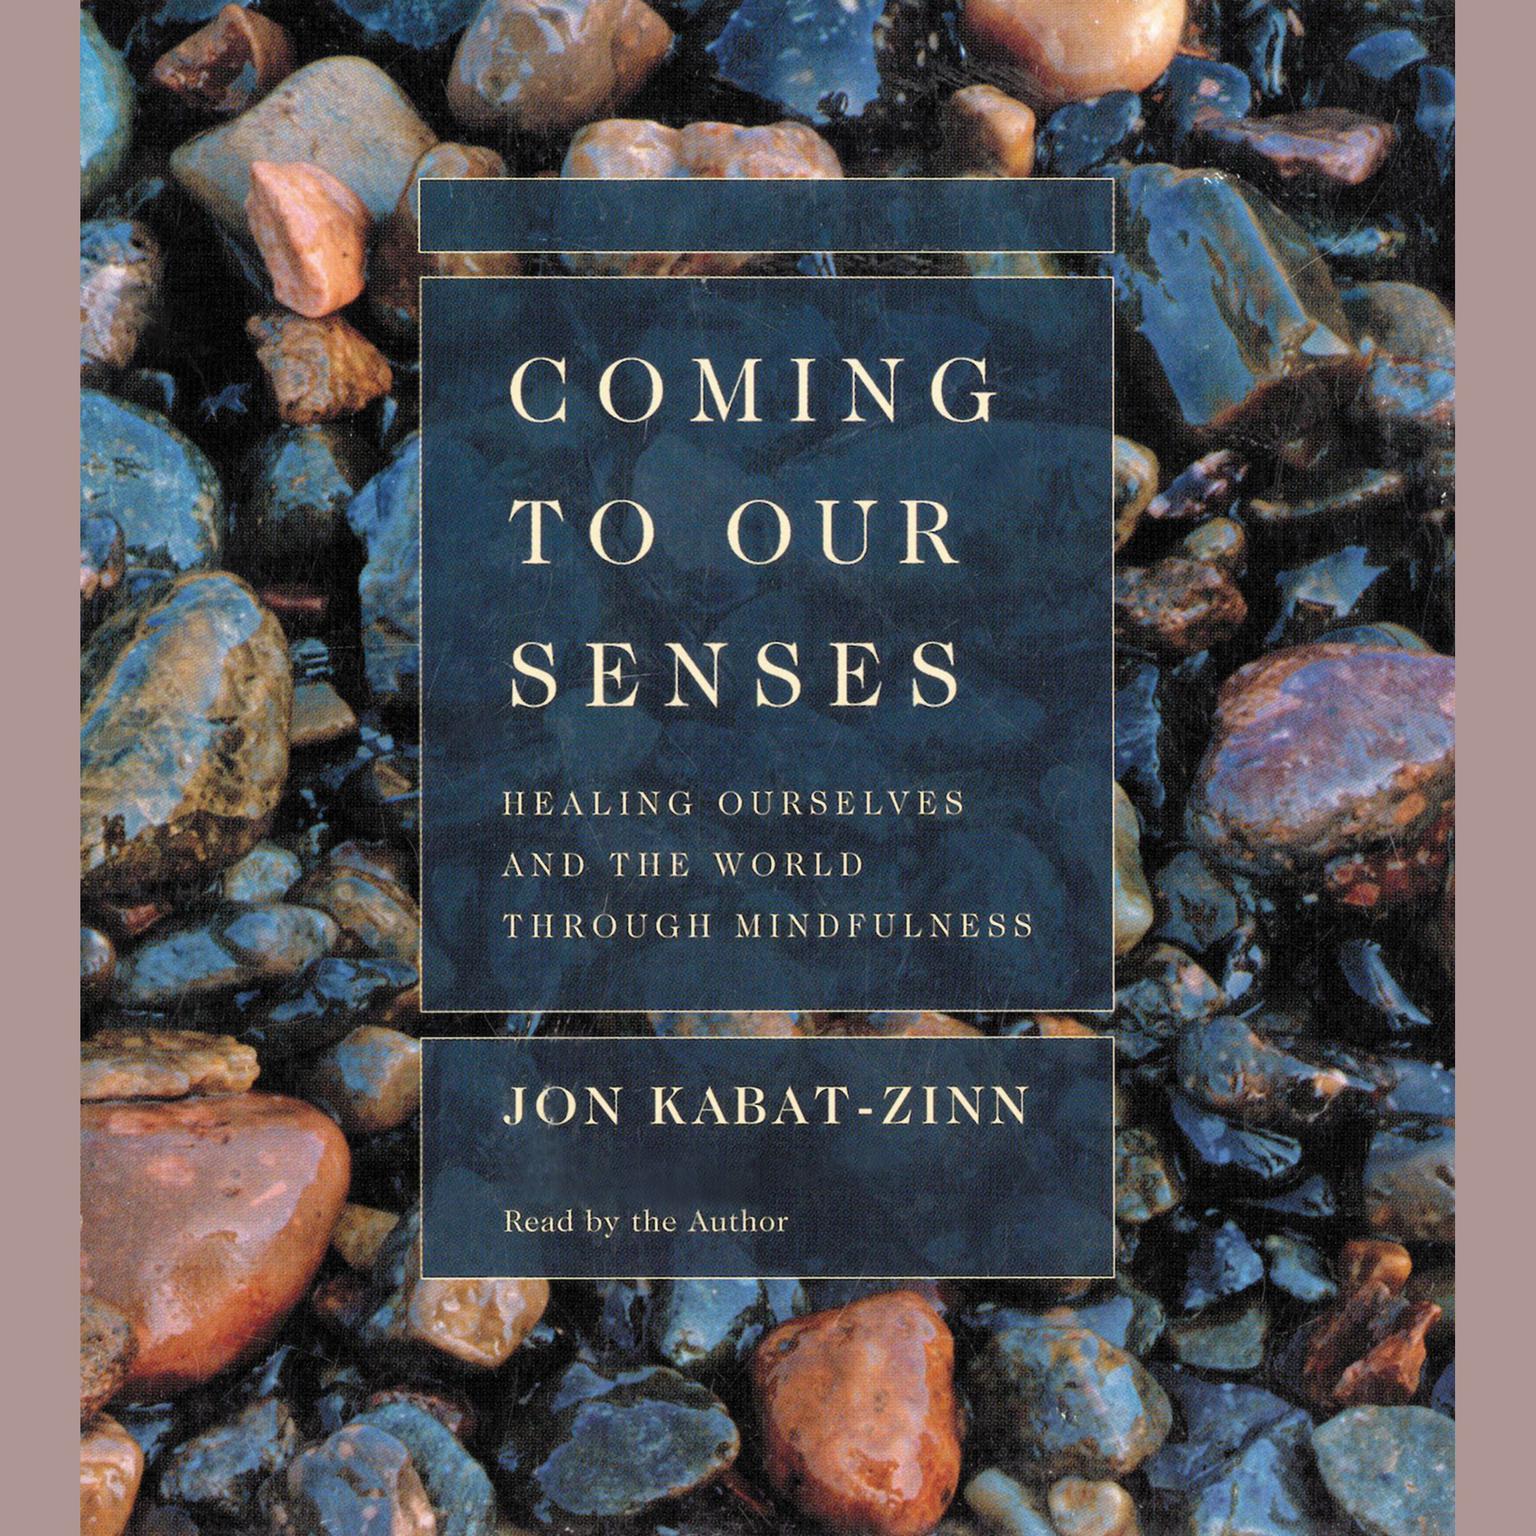 Coming to Our Senses (Abridged): Healing Ourselves and Our World Through Mindfulness Audiobook, by Jon Kabat-Zinn